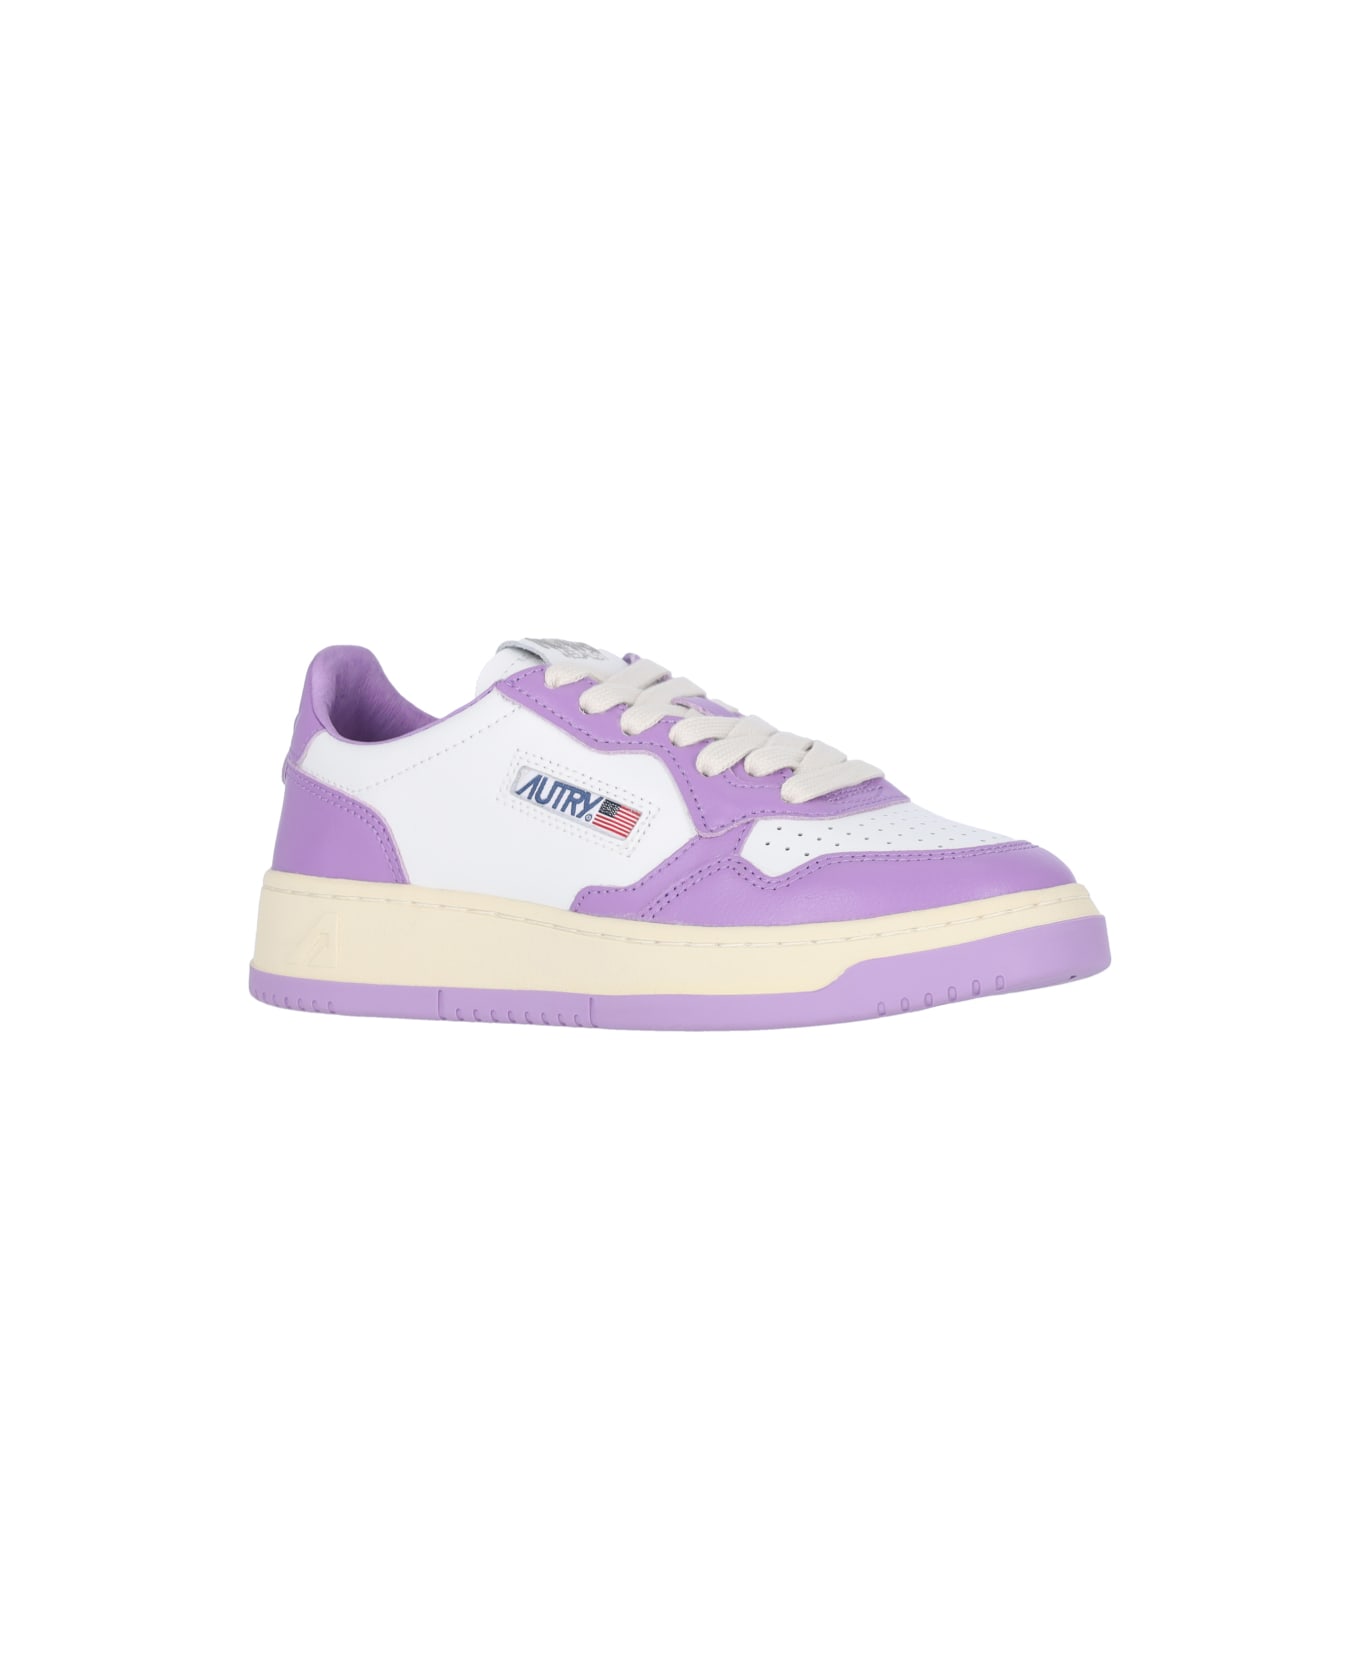 Autry Medialist Low Sneakers In White/purple Two-tone Leather - Violet